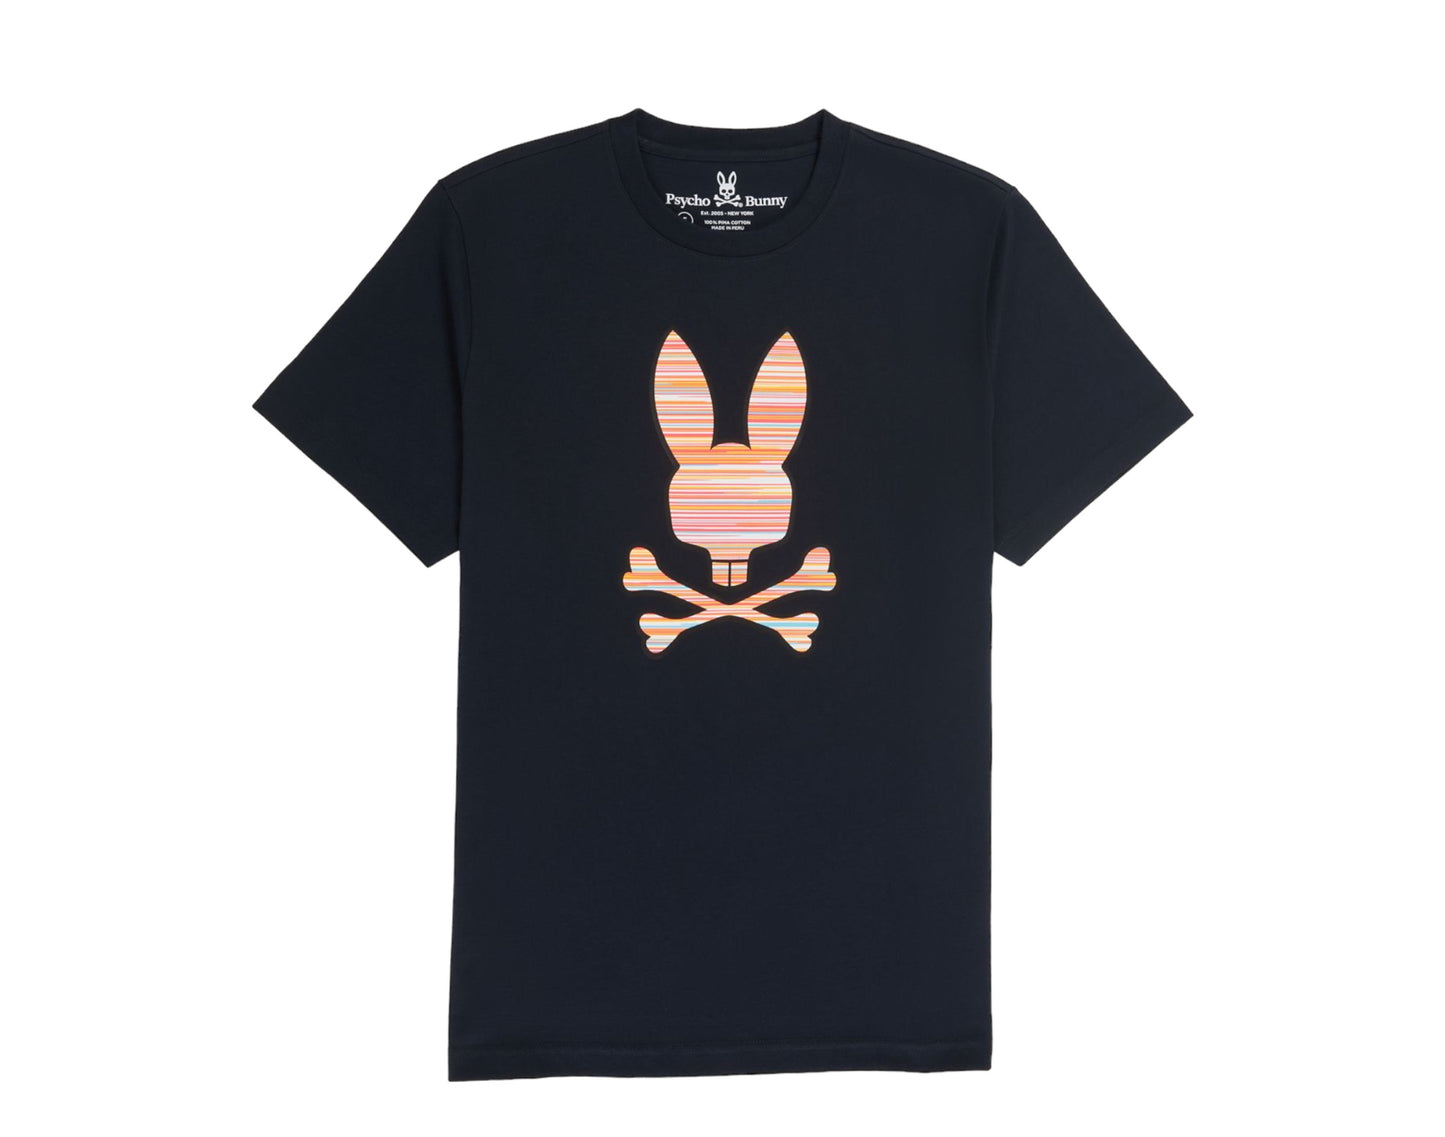 Psycho Bunny Newell Graphic Men's Big and Tall Tee Shirt